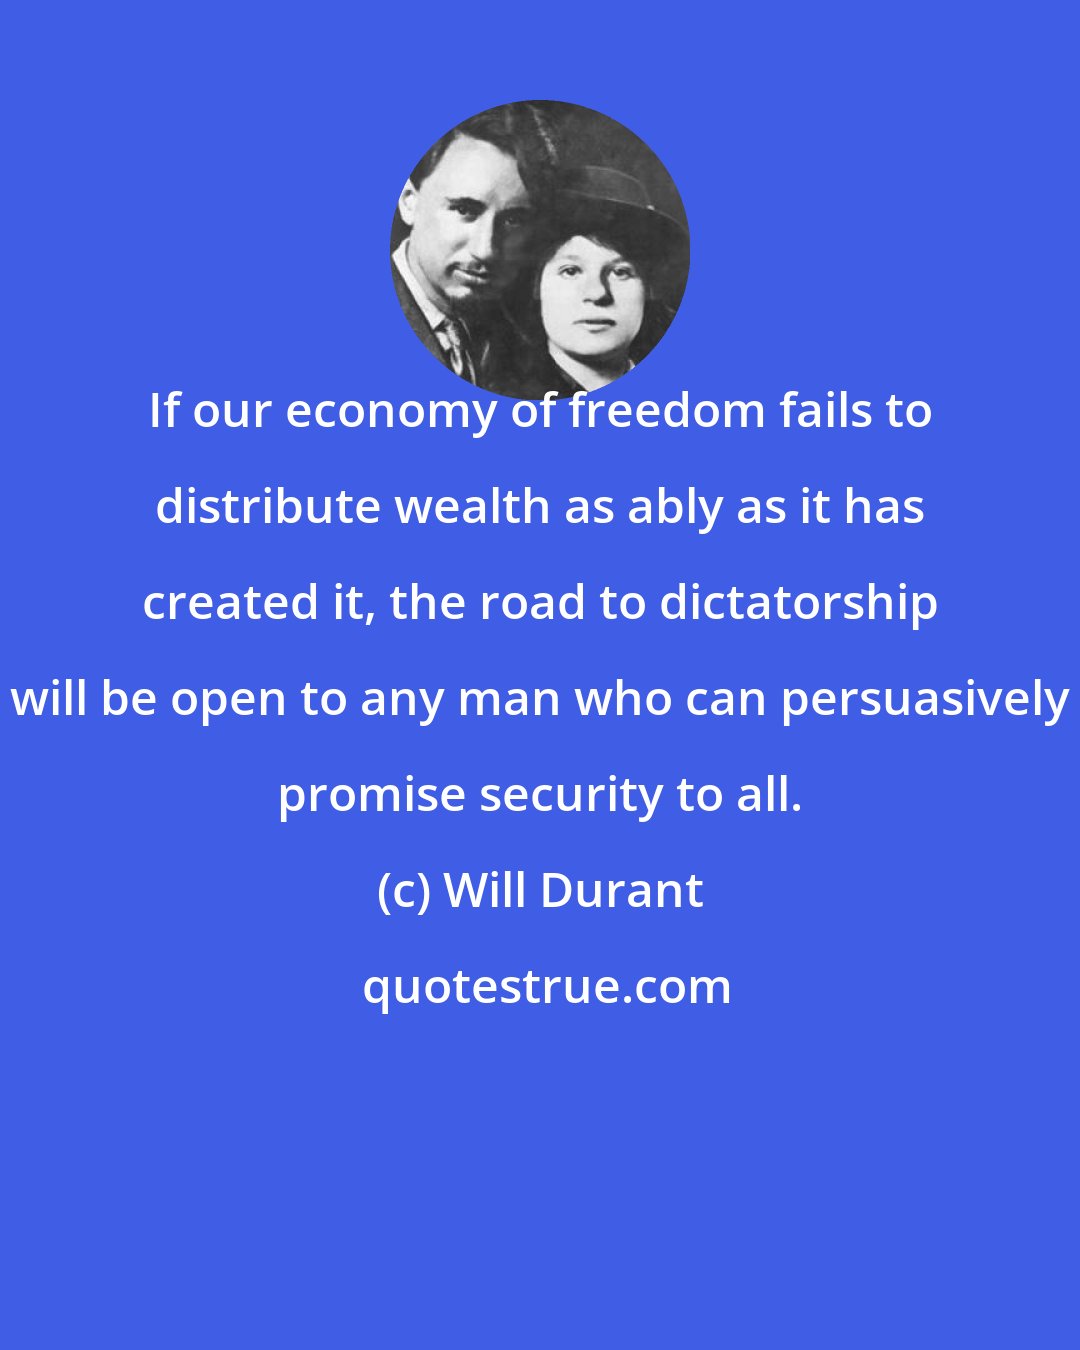 Will Durant: If our economy of freedom fails to distribute wealth as ably as it has created it, the road to dictatorship will be open to any man who can persuasively promise security to all.